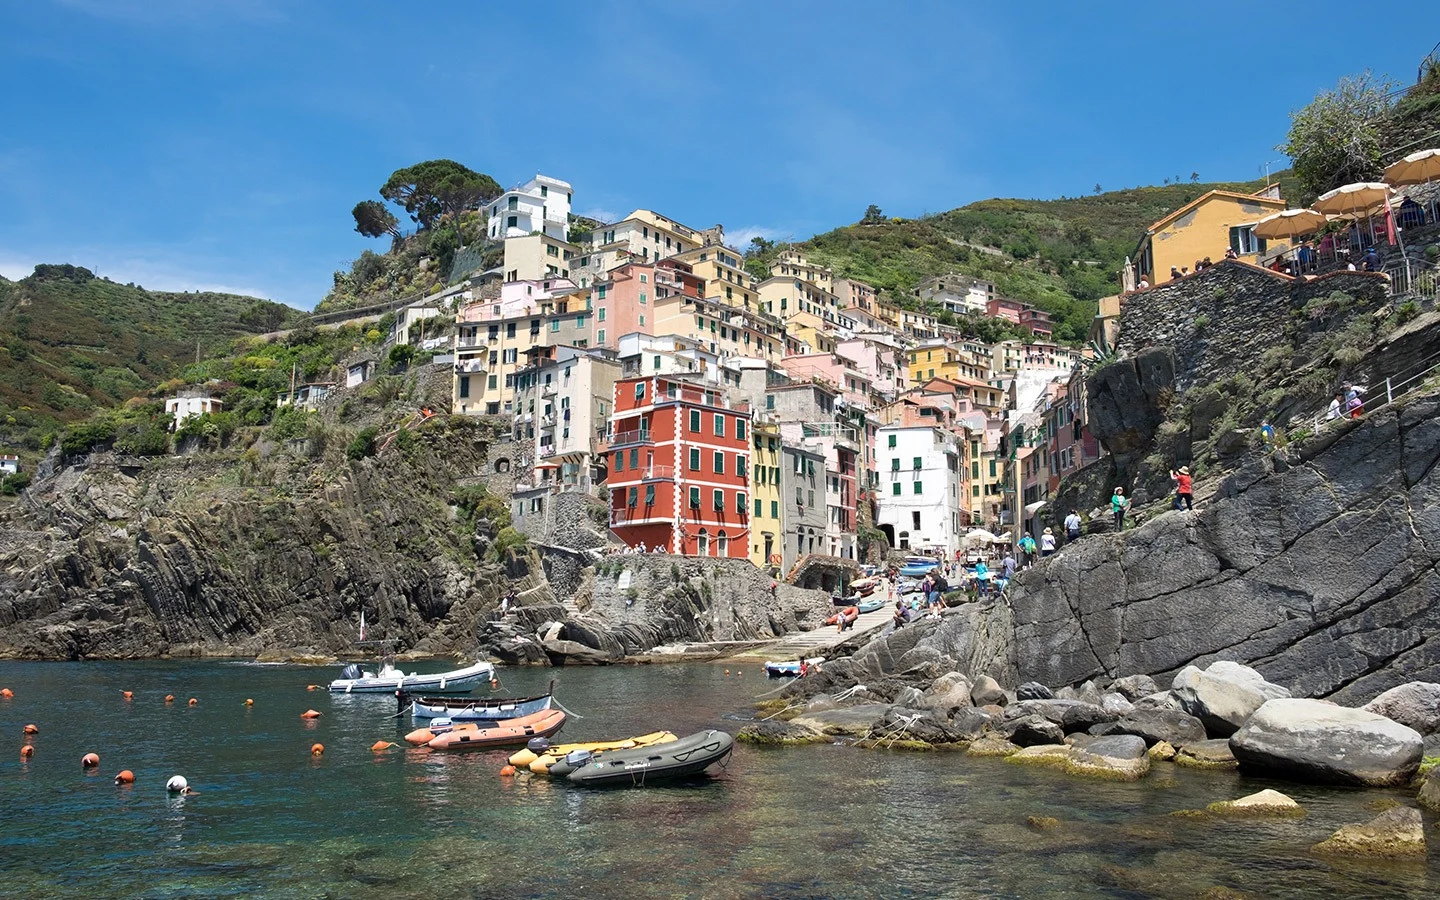 The first-timers guide to visiting the Cinque Terre